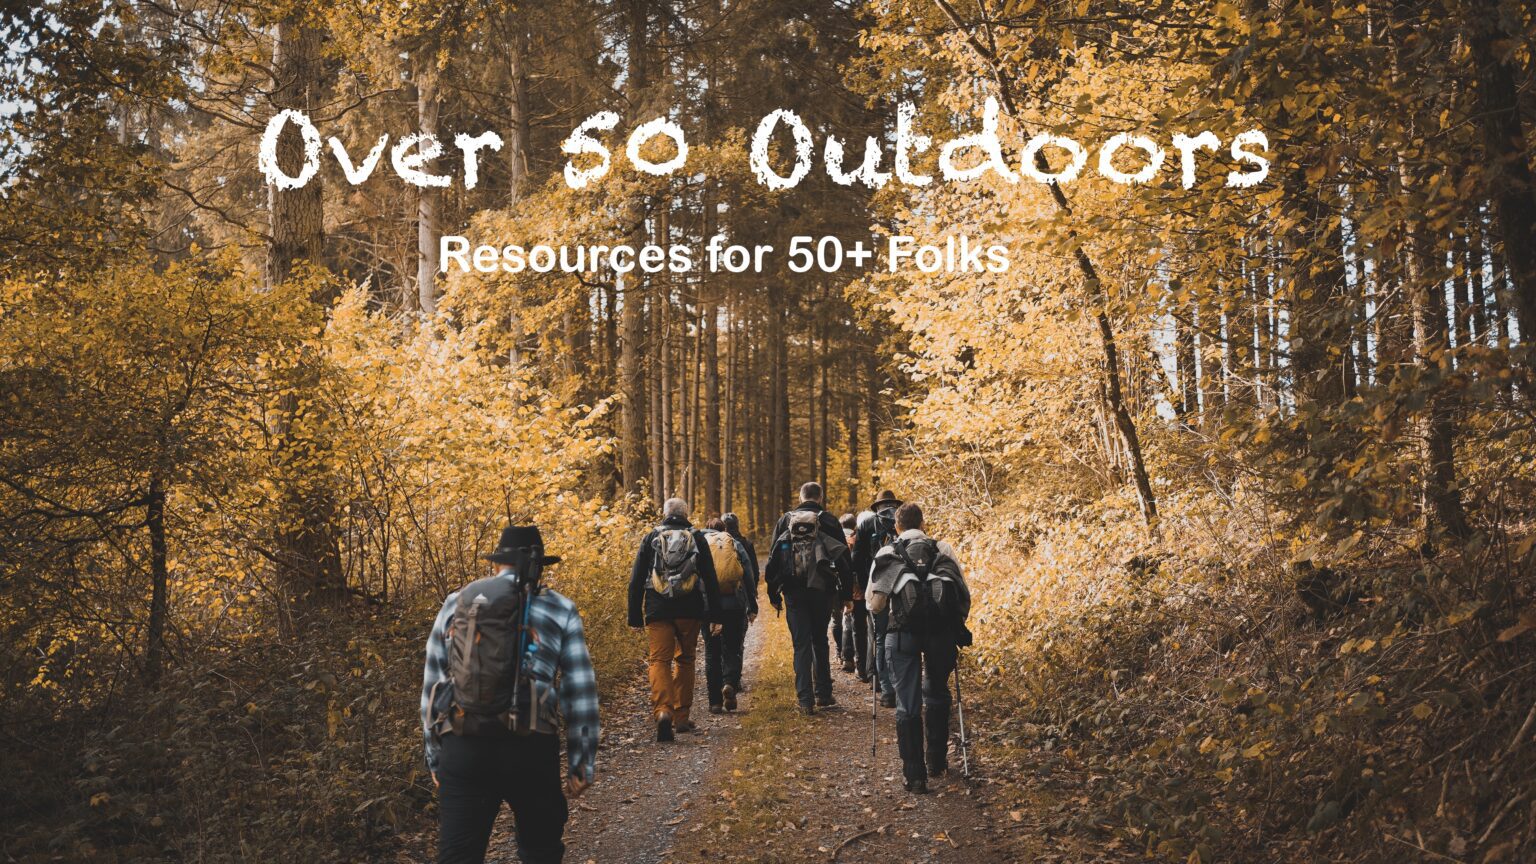 Over 50 Outdoors